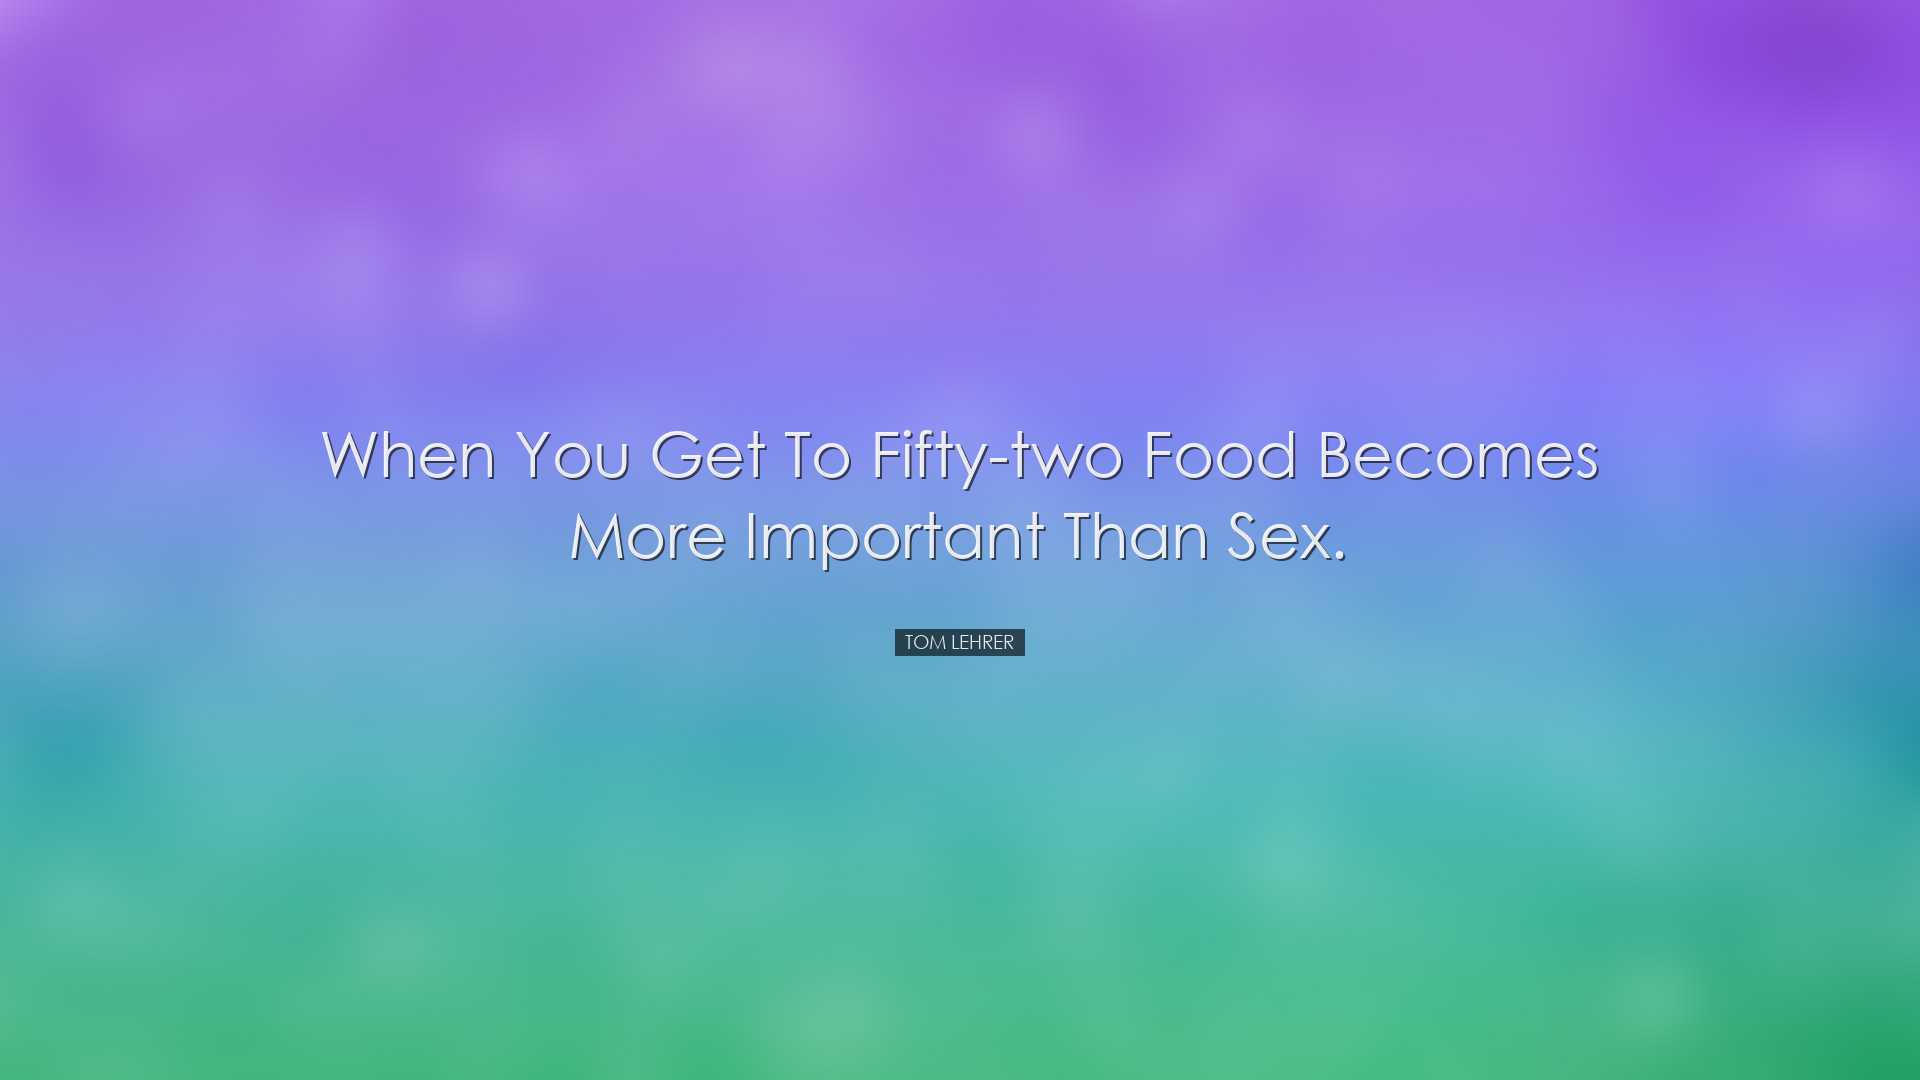 When you get to fifty-two food becomes more important than sex. -